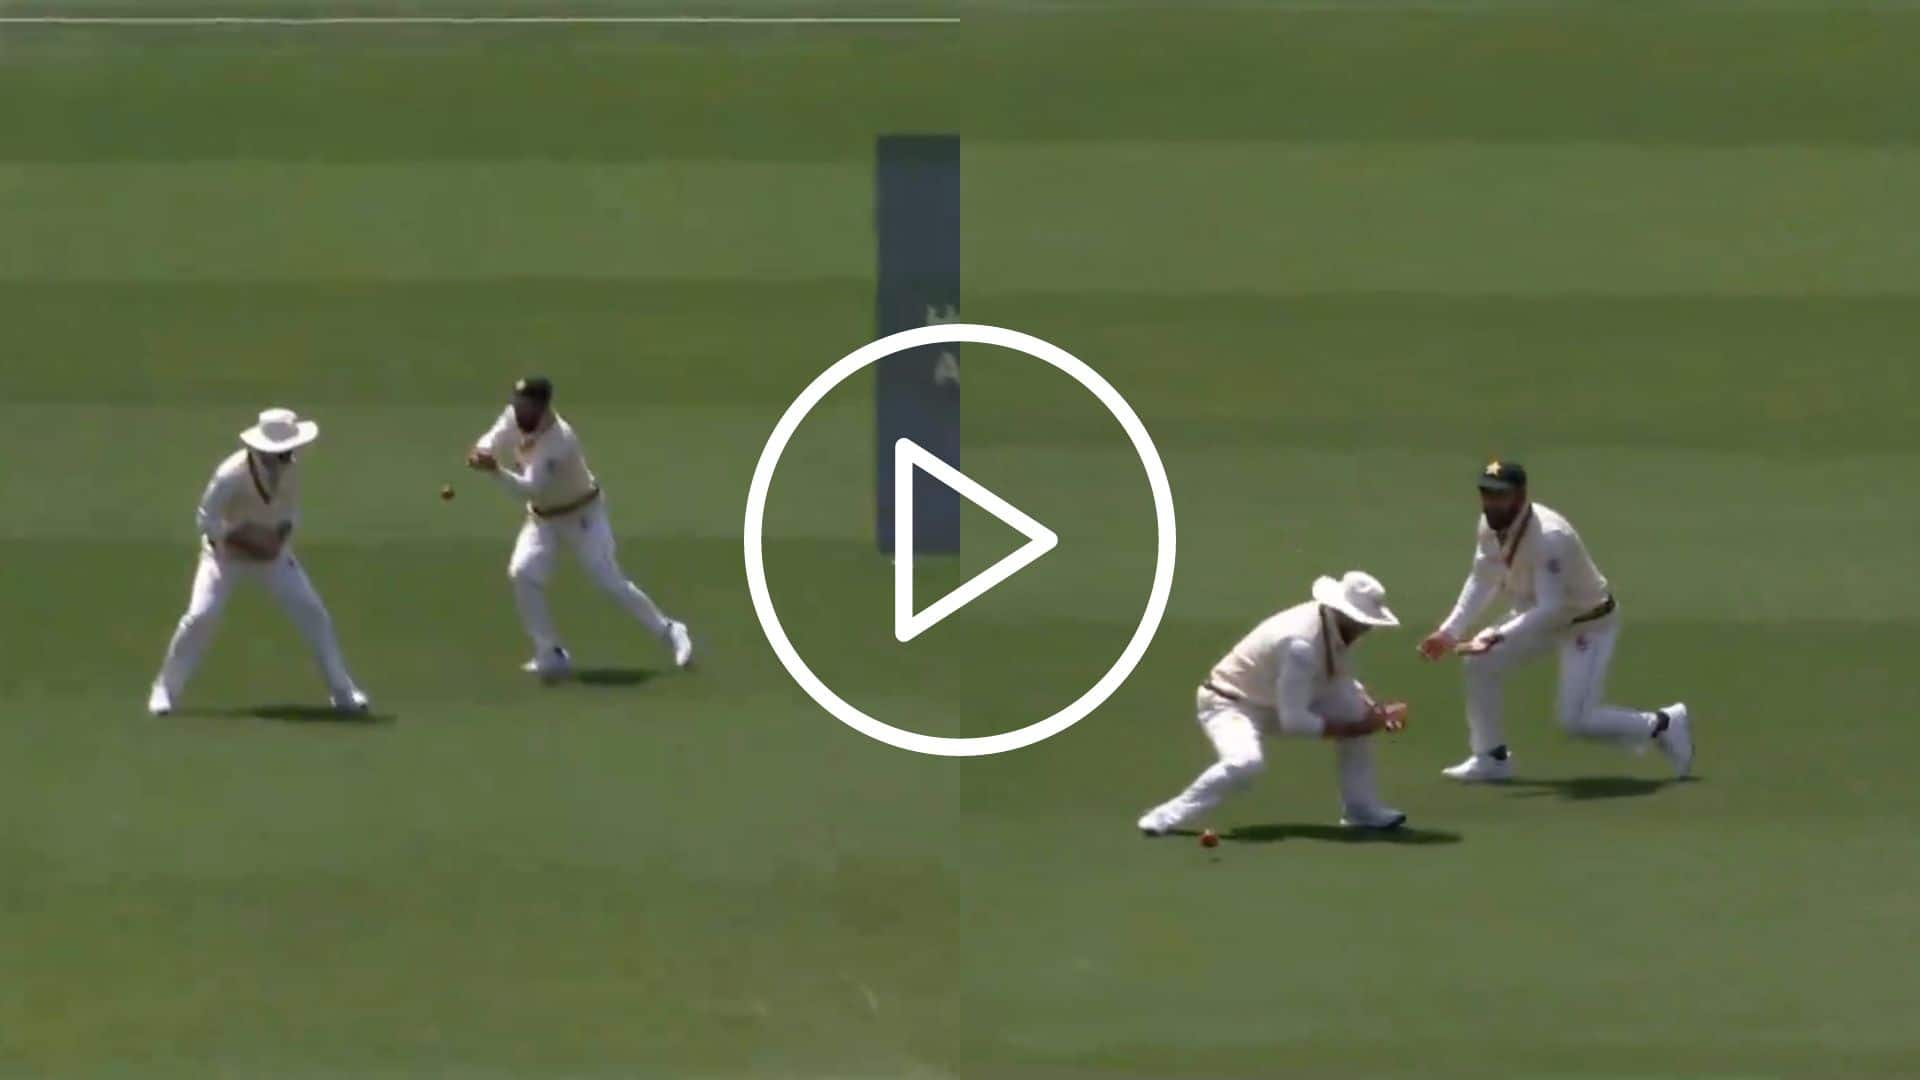 [Watch] Abdullah Shafique Drops Another Dolly As Mitchell Marsh Gets A Lifeline